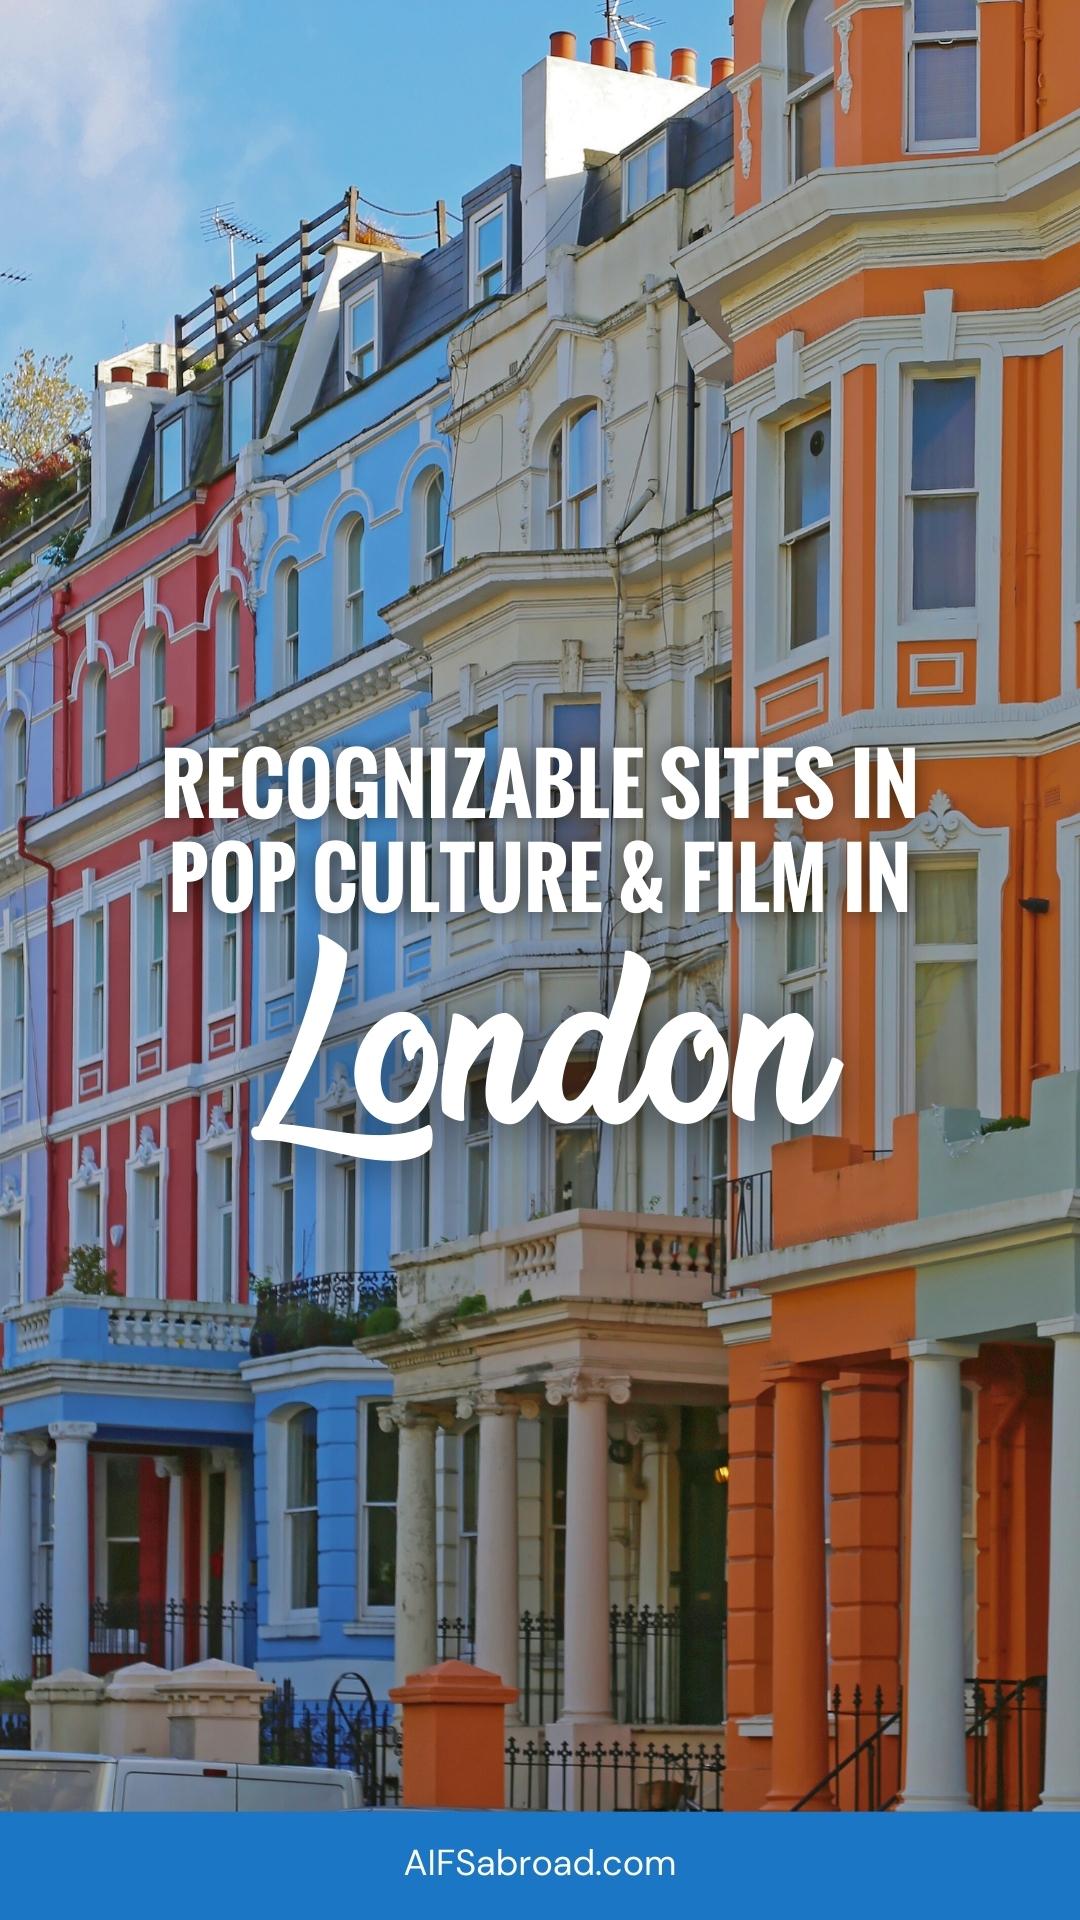 Pin image: Buildings of Notting Hill neighborhood in London, England with text overlay "Recognizable Sites in Pop Culture and Film in London: